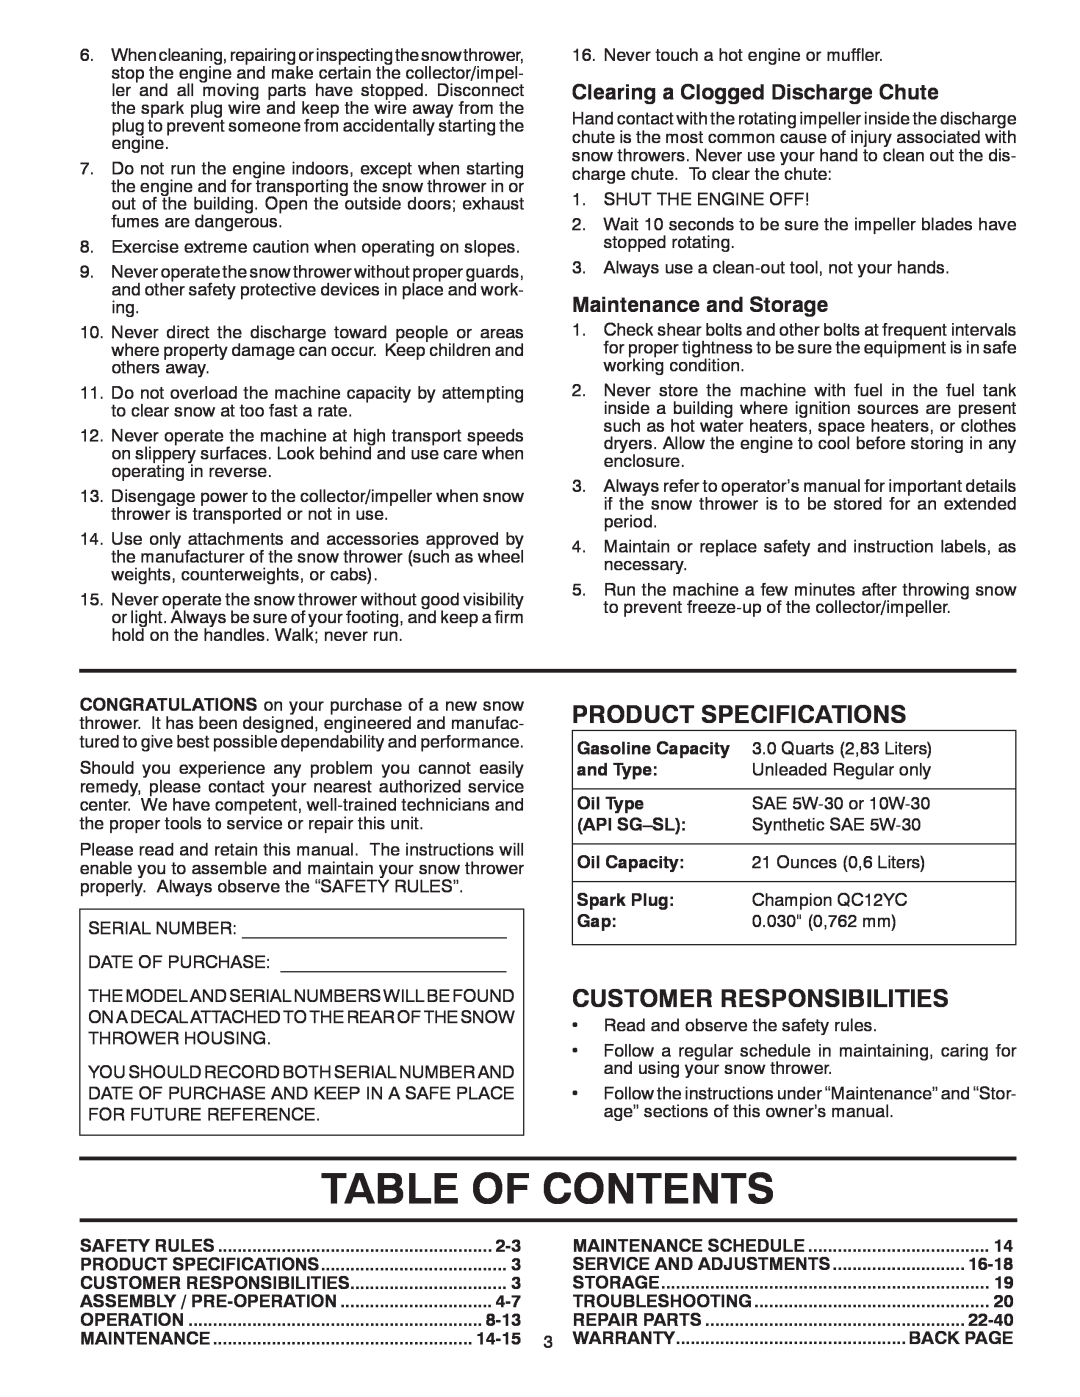 Poulan 428861 Table Of Contents, Product Specifications, Customer Responsibilities, Clearing a Clogged Discharge Chute 